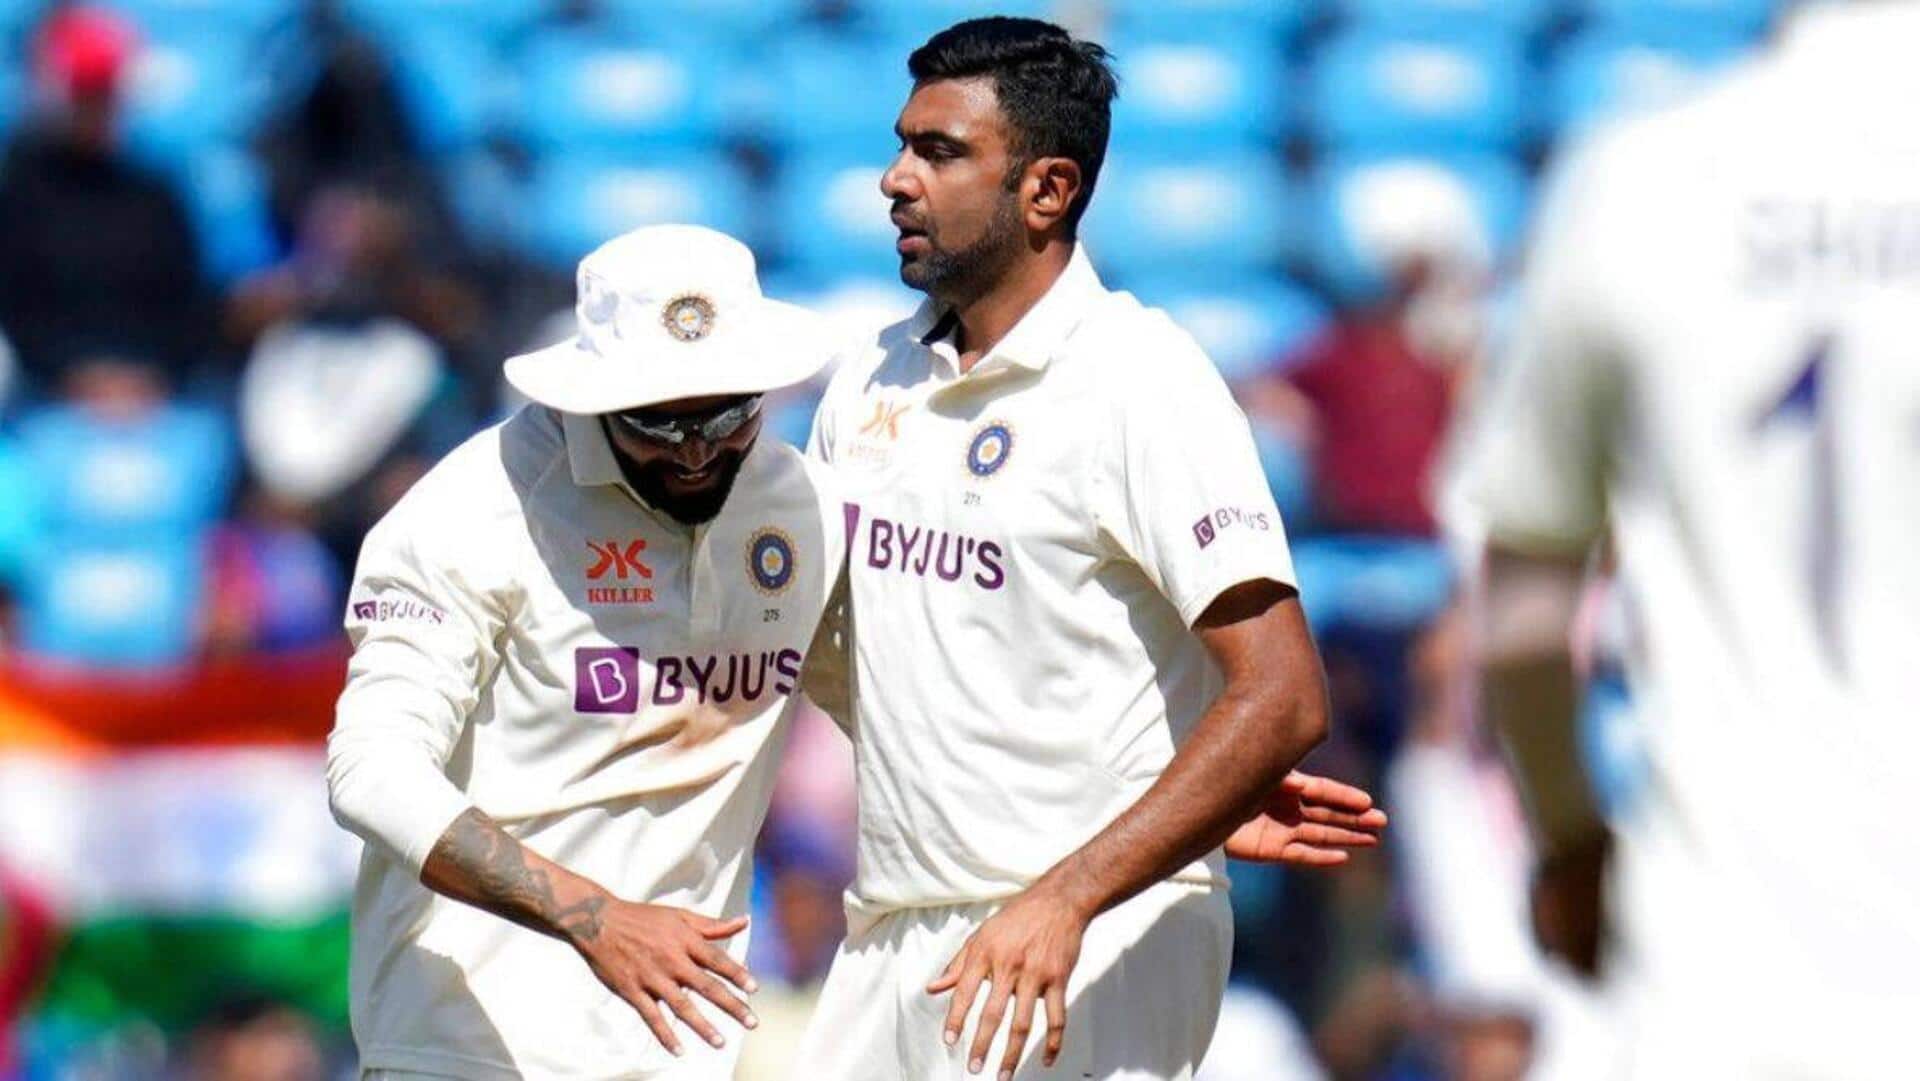 Ashwin-Jadeja become India's most successful bowling pair (Tests)